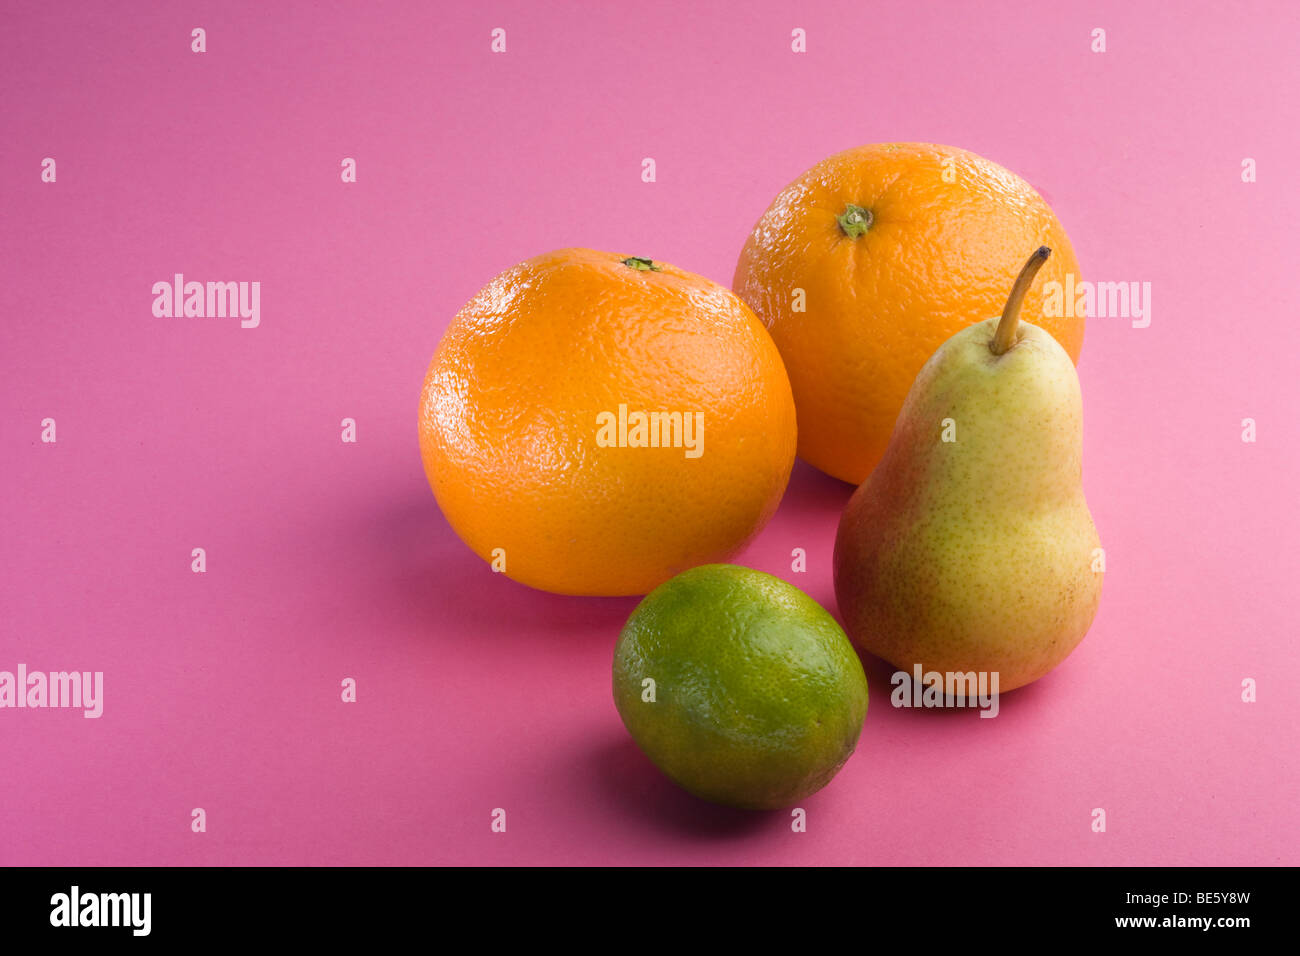 Oranges, pear, lime Stock Photo